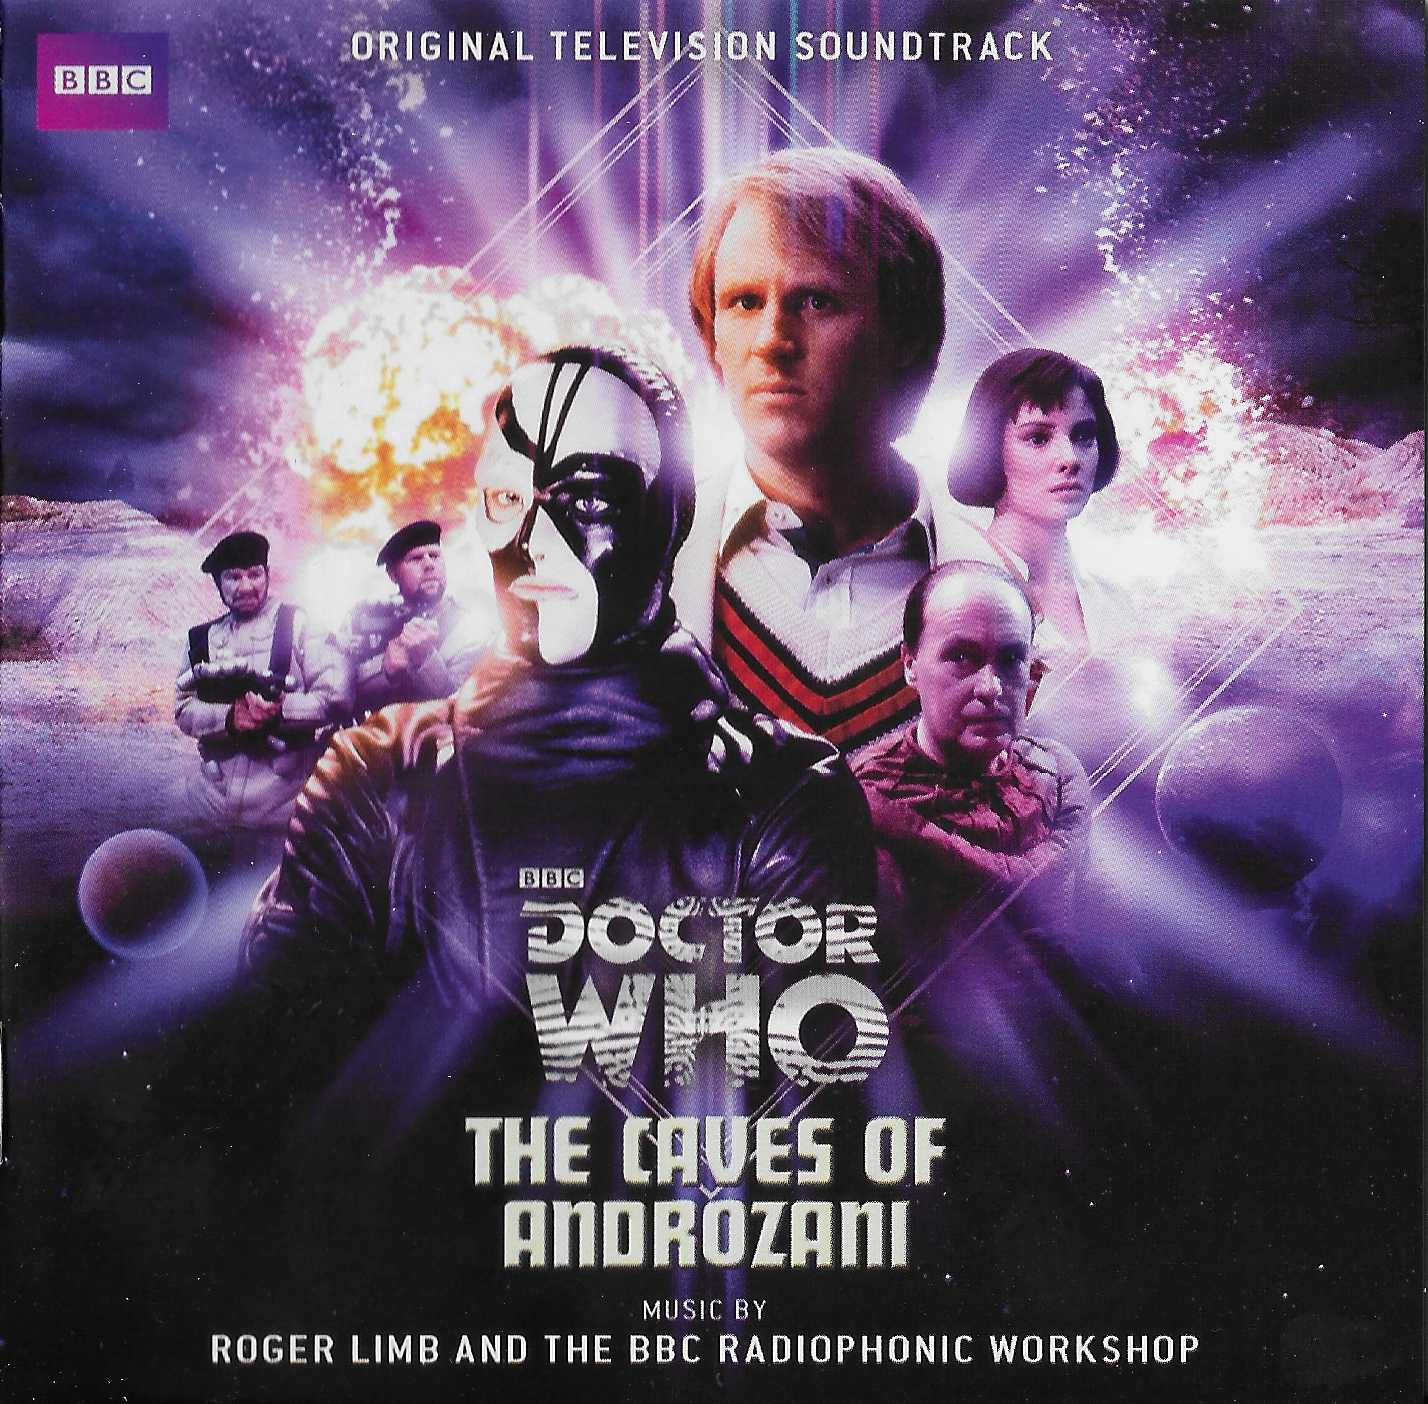 Picture of Doctor Who - The caves of Androzani by artist Roger Limb from the BBC cds - Records and Tapes library